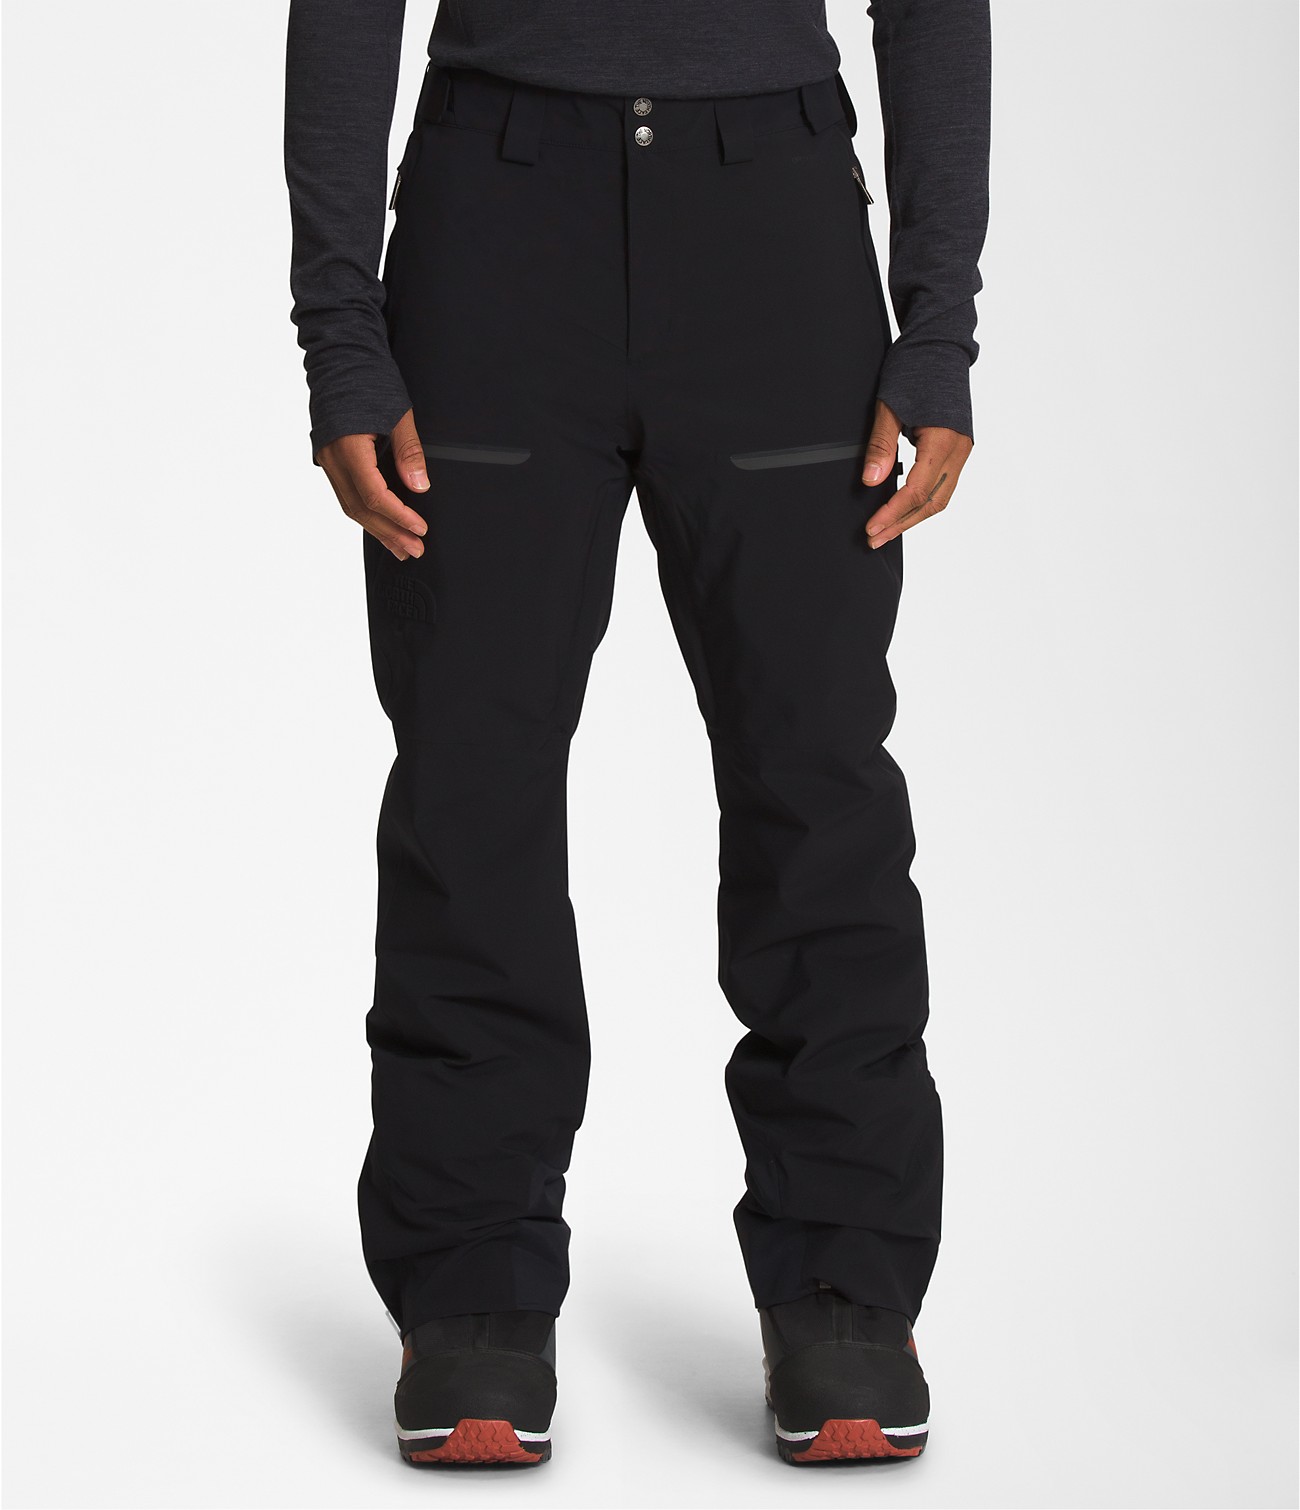 Unlock Wilderness' choice in the Spyder Vs North Face comparison, the Inclination Pants by The North Face